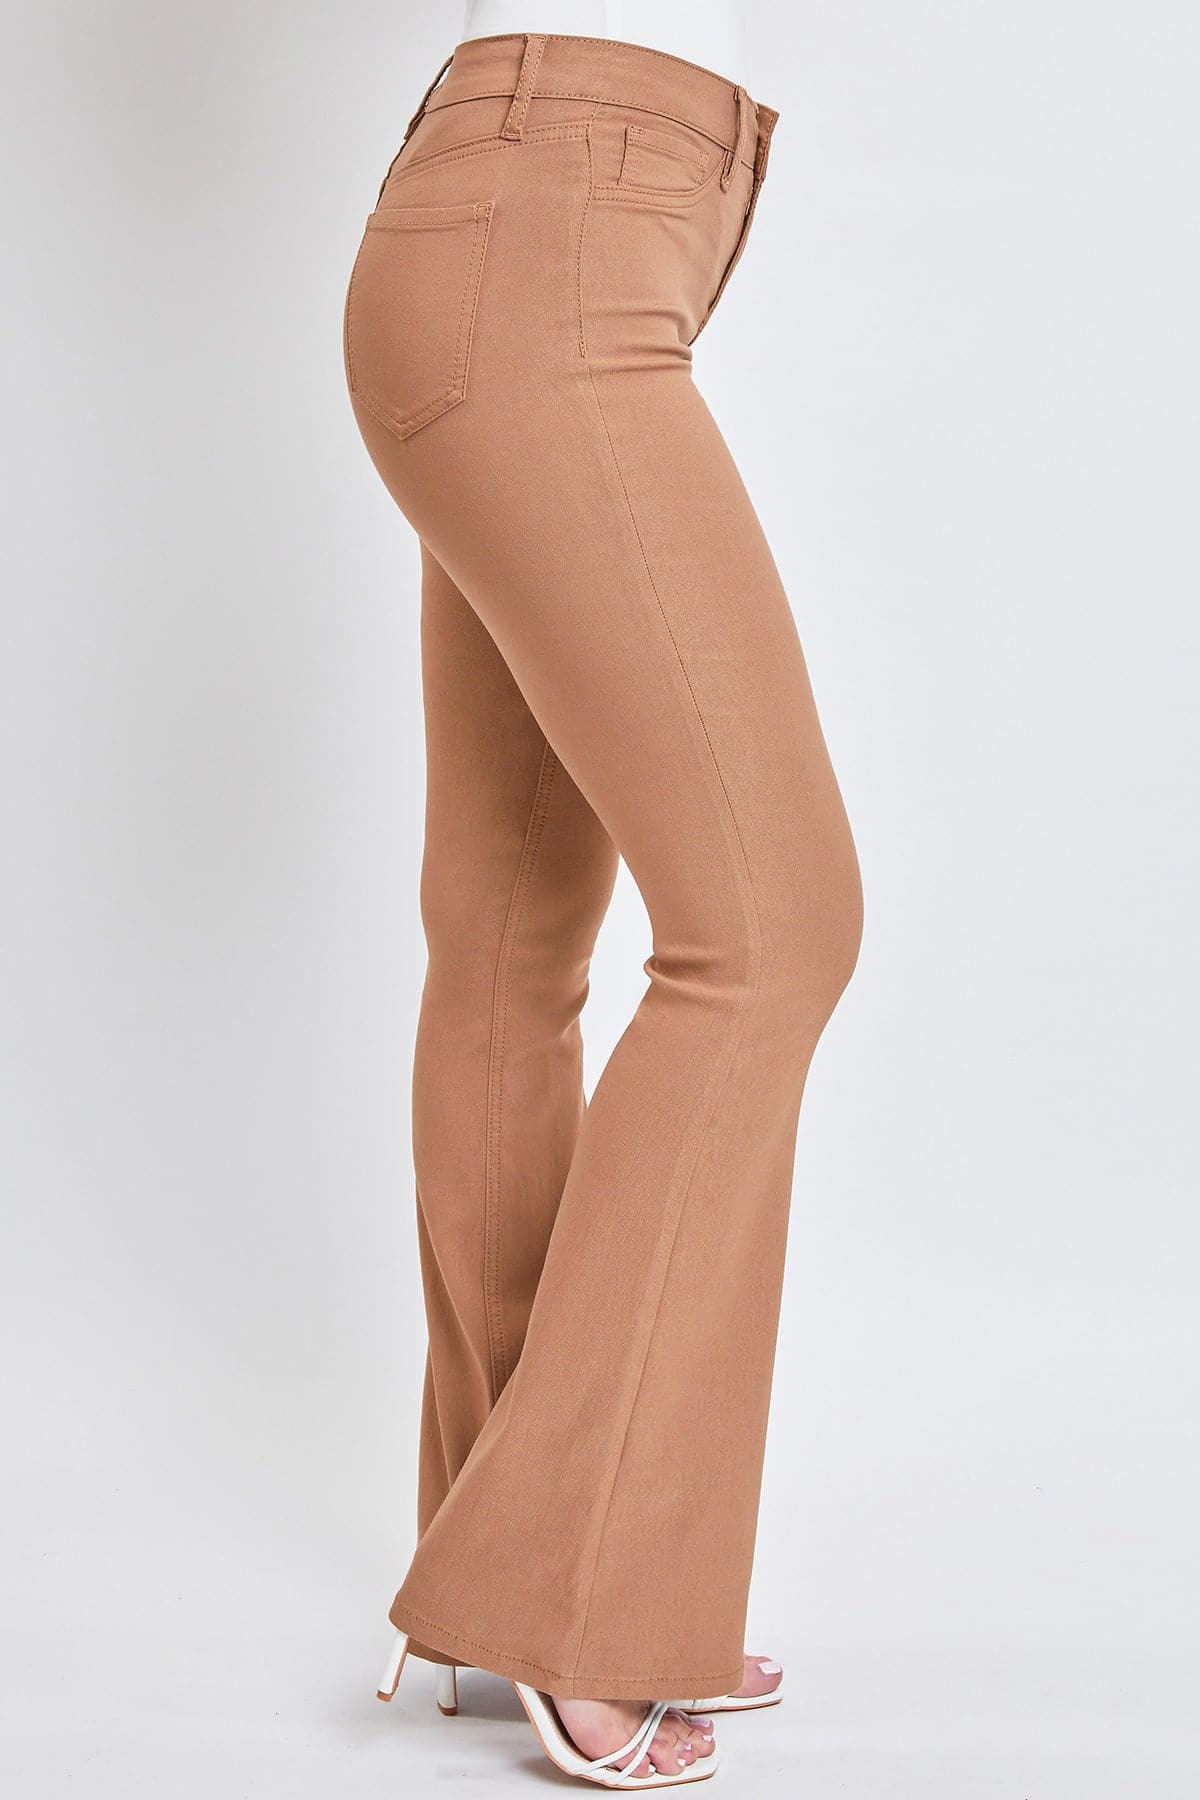 Women's Hyperstretch Forever Color Flare Pants from YMI – YMI JEANS